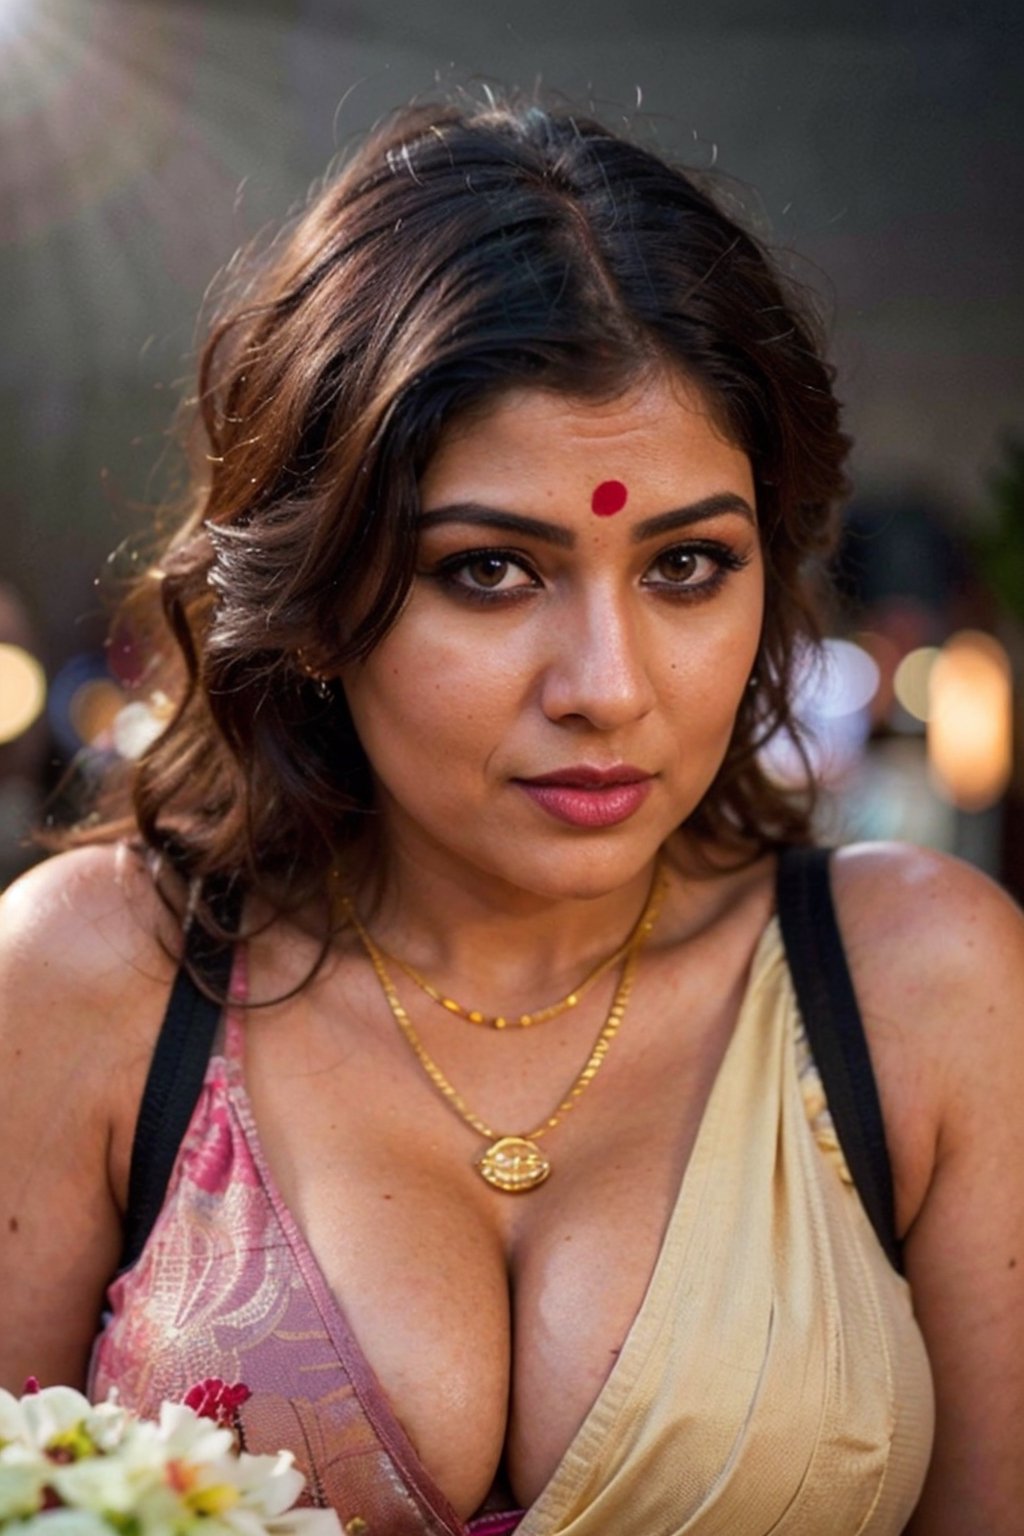 masterpiece, 8k, best quality, ultra highres, professional photography, sharp focus, HDR, 8K resolution, intricate detail, sophisticated detail, depth of field, photorealistic, ((sindoor on hair partings)), ((voluptuous,slighty_chubby)), hindu milf, sexy woman with hina tattos,  lariat necklace, large breasts, blushing, kohl eyed, ((large breast, curvaceous)), sitting at dashashwamedh ghat of Varanasi, temples of Varanasi, benares, hyperrealistic, (analog quality:1.3), (film grain:1.2), beautiful background, (best quality:1.3), ultra clarity , super realism , 8k, (natural skin texture, hyperrealism, soft light, sharp:1.2), (intricate details:1.12), hdr, (dark shot:1.33), neutral colors, (hdr:1.4), (muted colors:1.5), technicolor, (intricate), (night:1.4), hyperdetailed, dramatic, intricate details, (cinematic),super realism , 8k, (natural skin texture, hyperrealism, soft light, sharp:1.2), (intricate details:1.12), hdr, (dark shot:1.22), vibrant colors, (hdr:1.4), (vibrant colors:1.4), (intricate), (artstation:1.2), hyperdetailed, dramatic, intricate details, (technicolor:0.9), (rutkowski:0.8), cinematic, detailed,